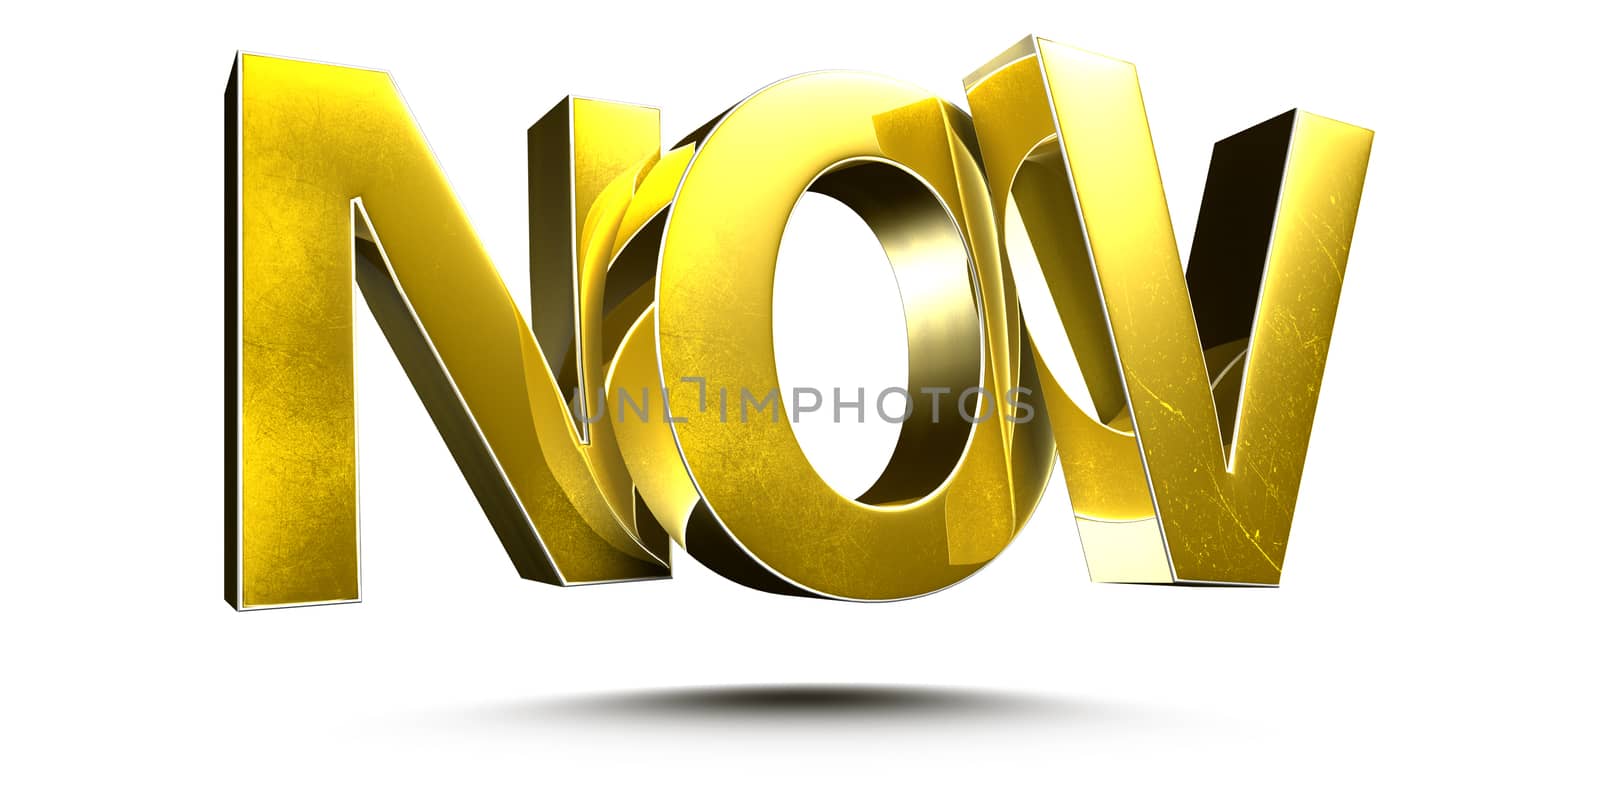 Golden november isolated on white background illustration 3D rendering.(with Clipping Path).